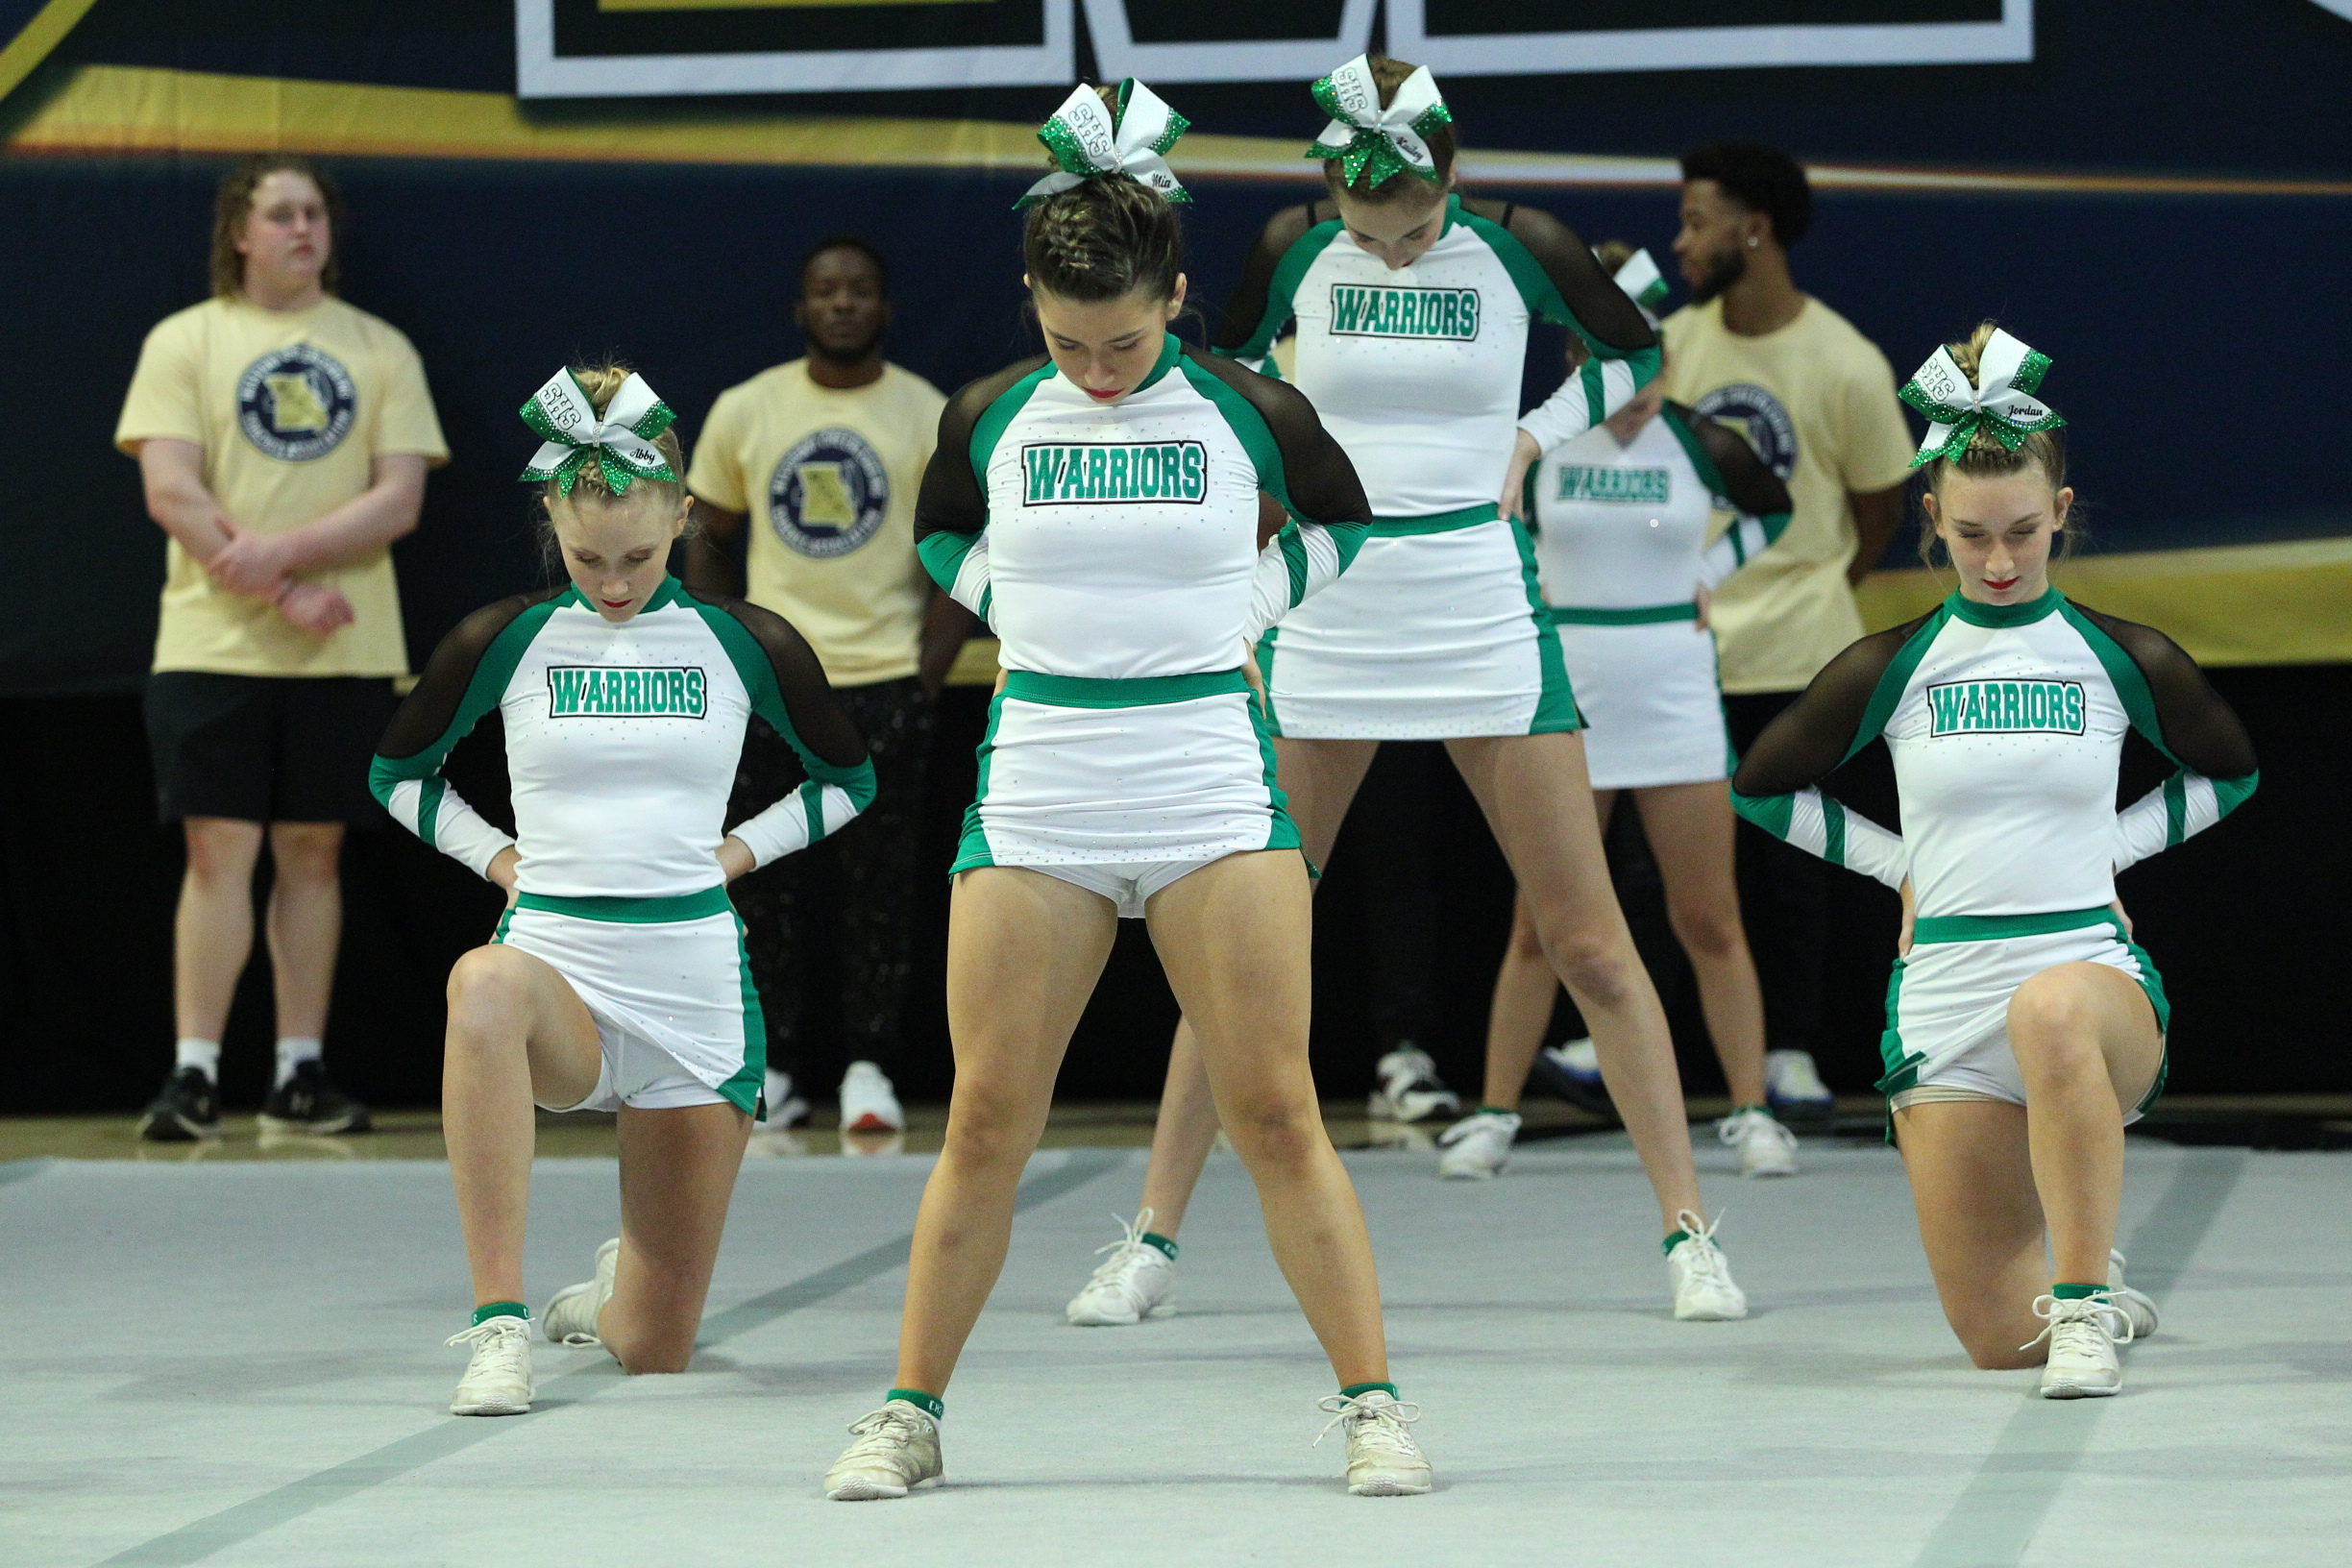 Cheerleaders perform at state competition